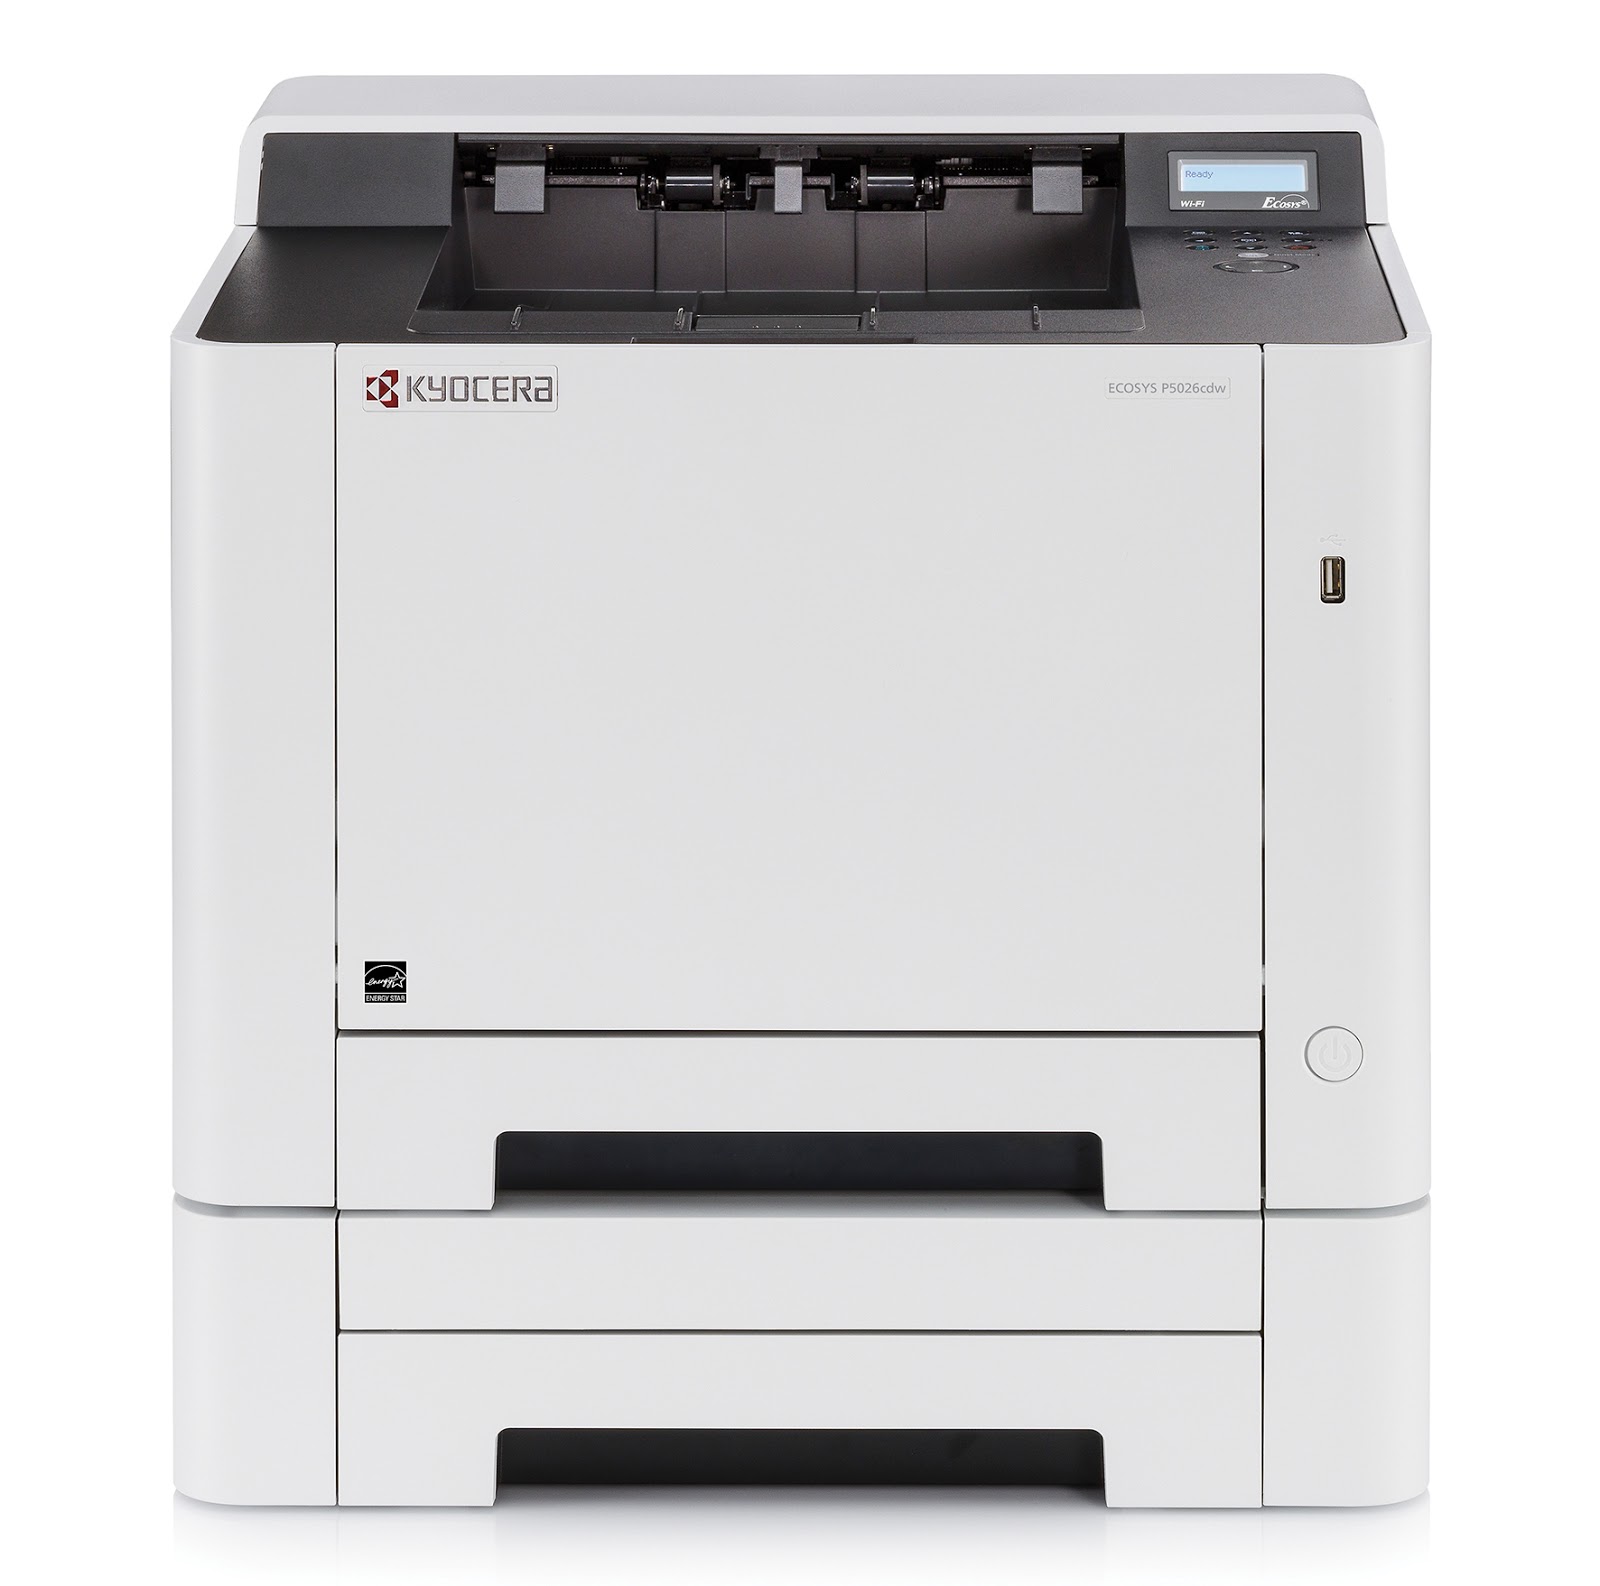 Kyocera Ecosys P5026cdw Driver Download